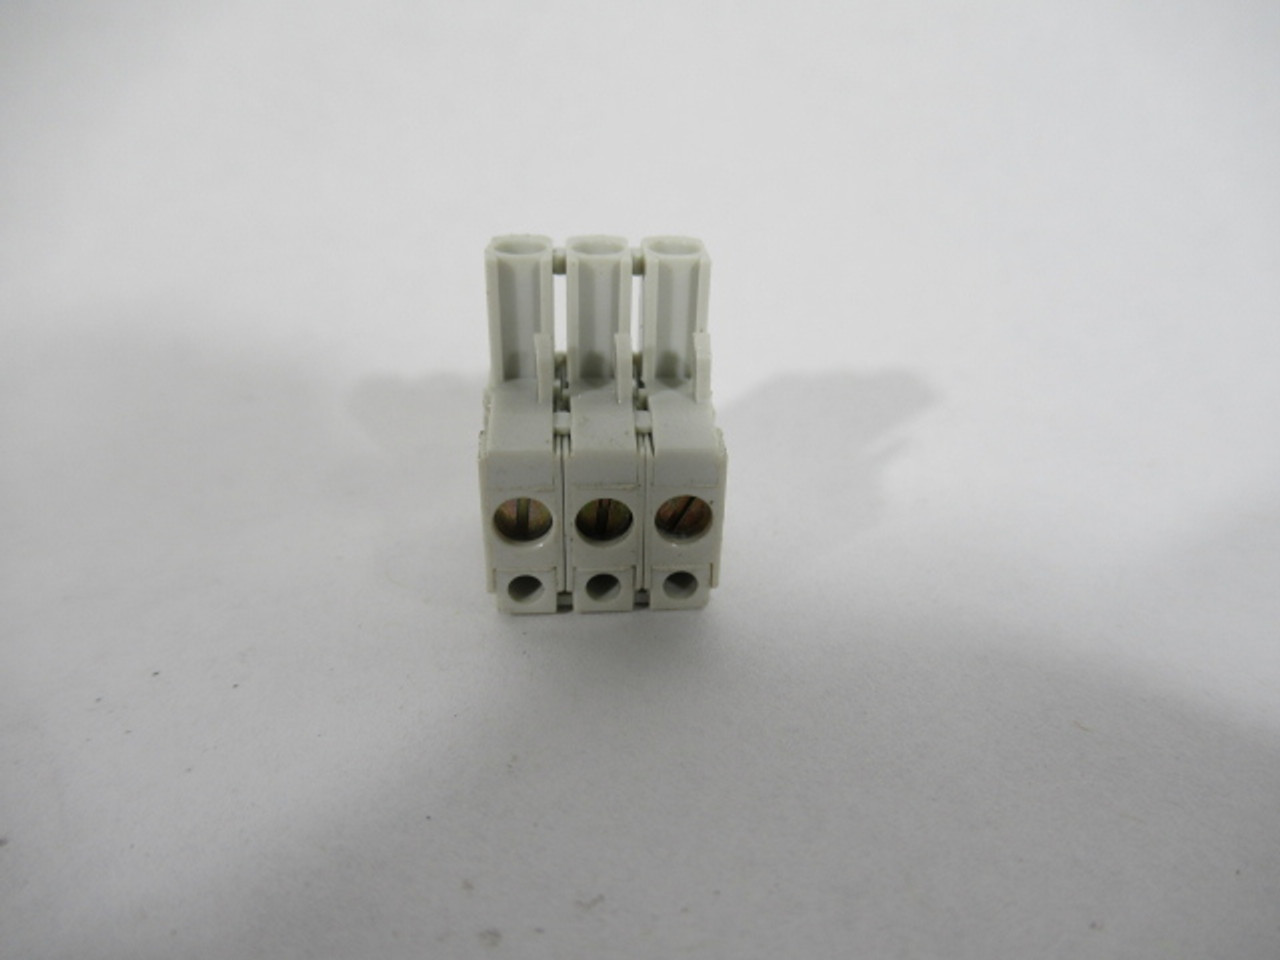 Entrelec CPFT2/3 Cable Connector 3 Position 250-300V USED